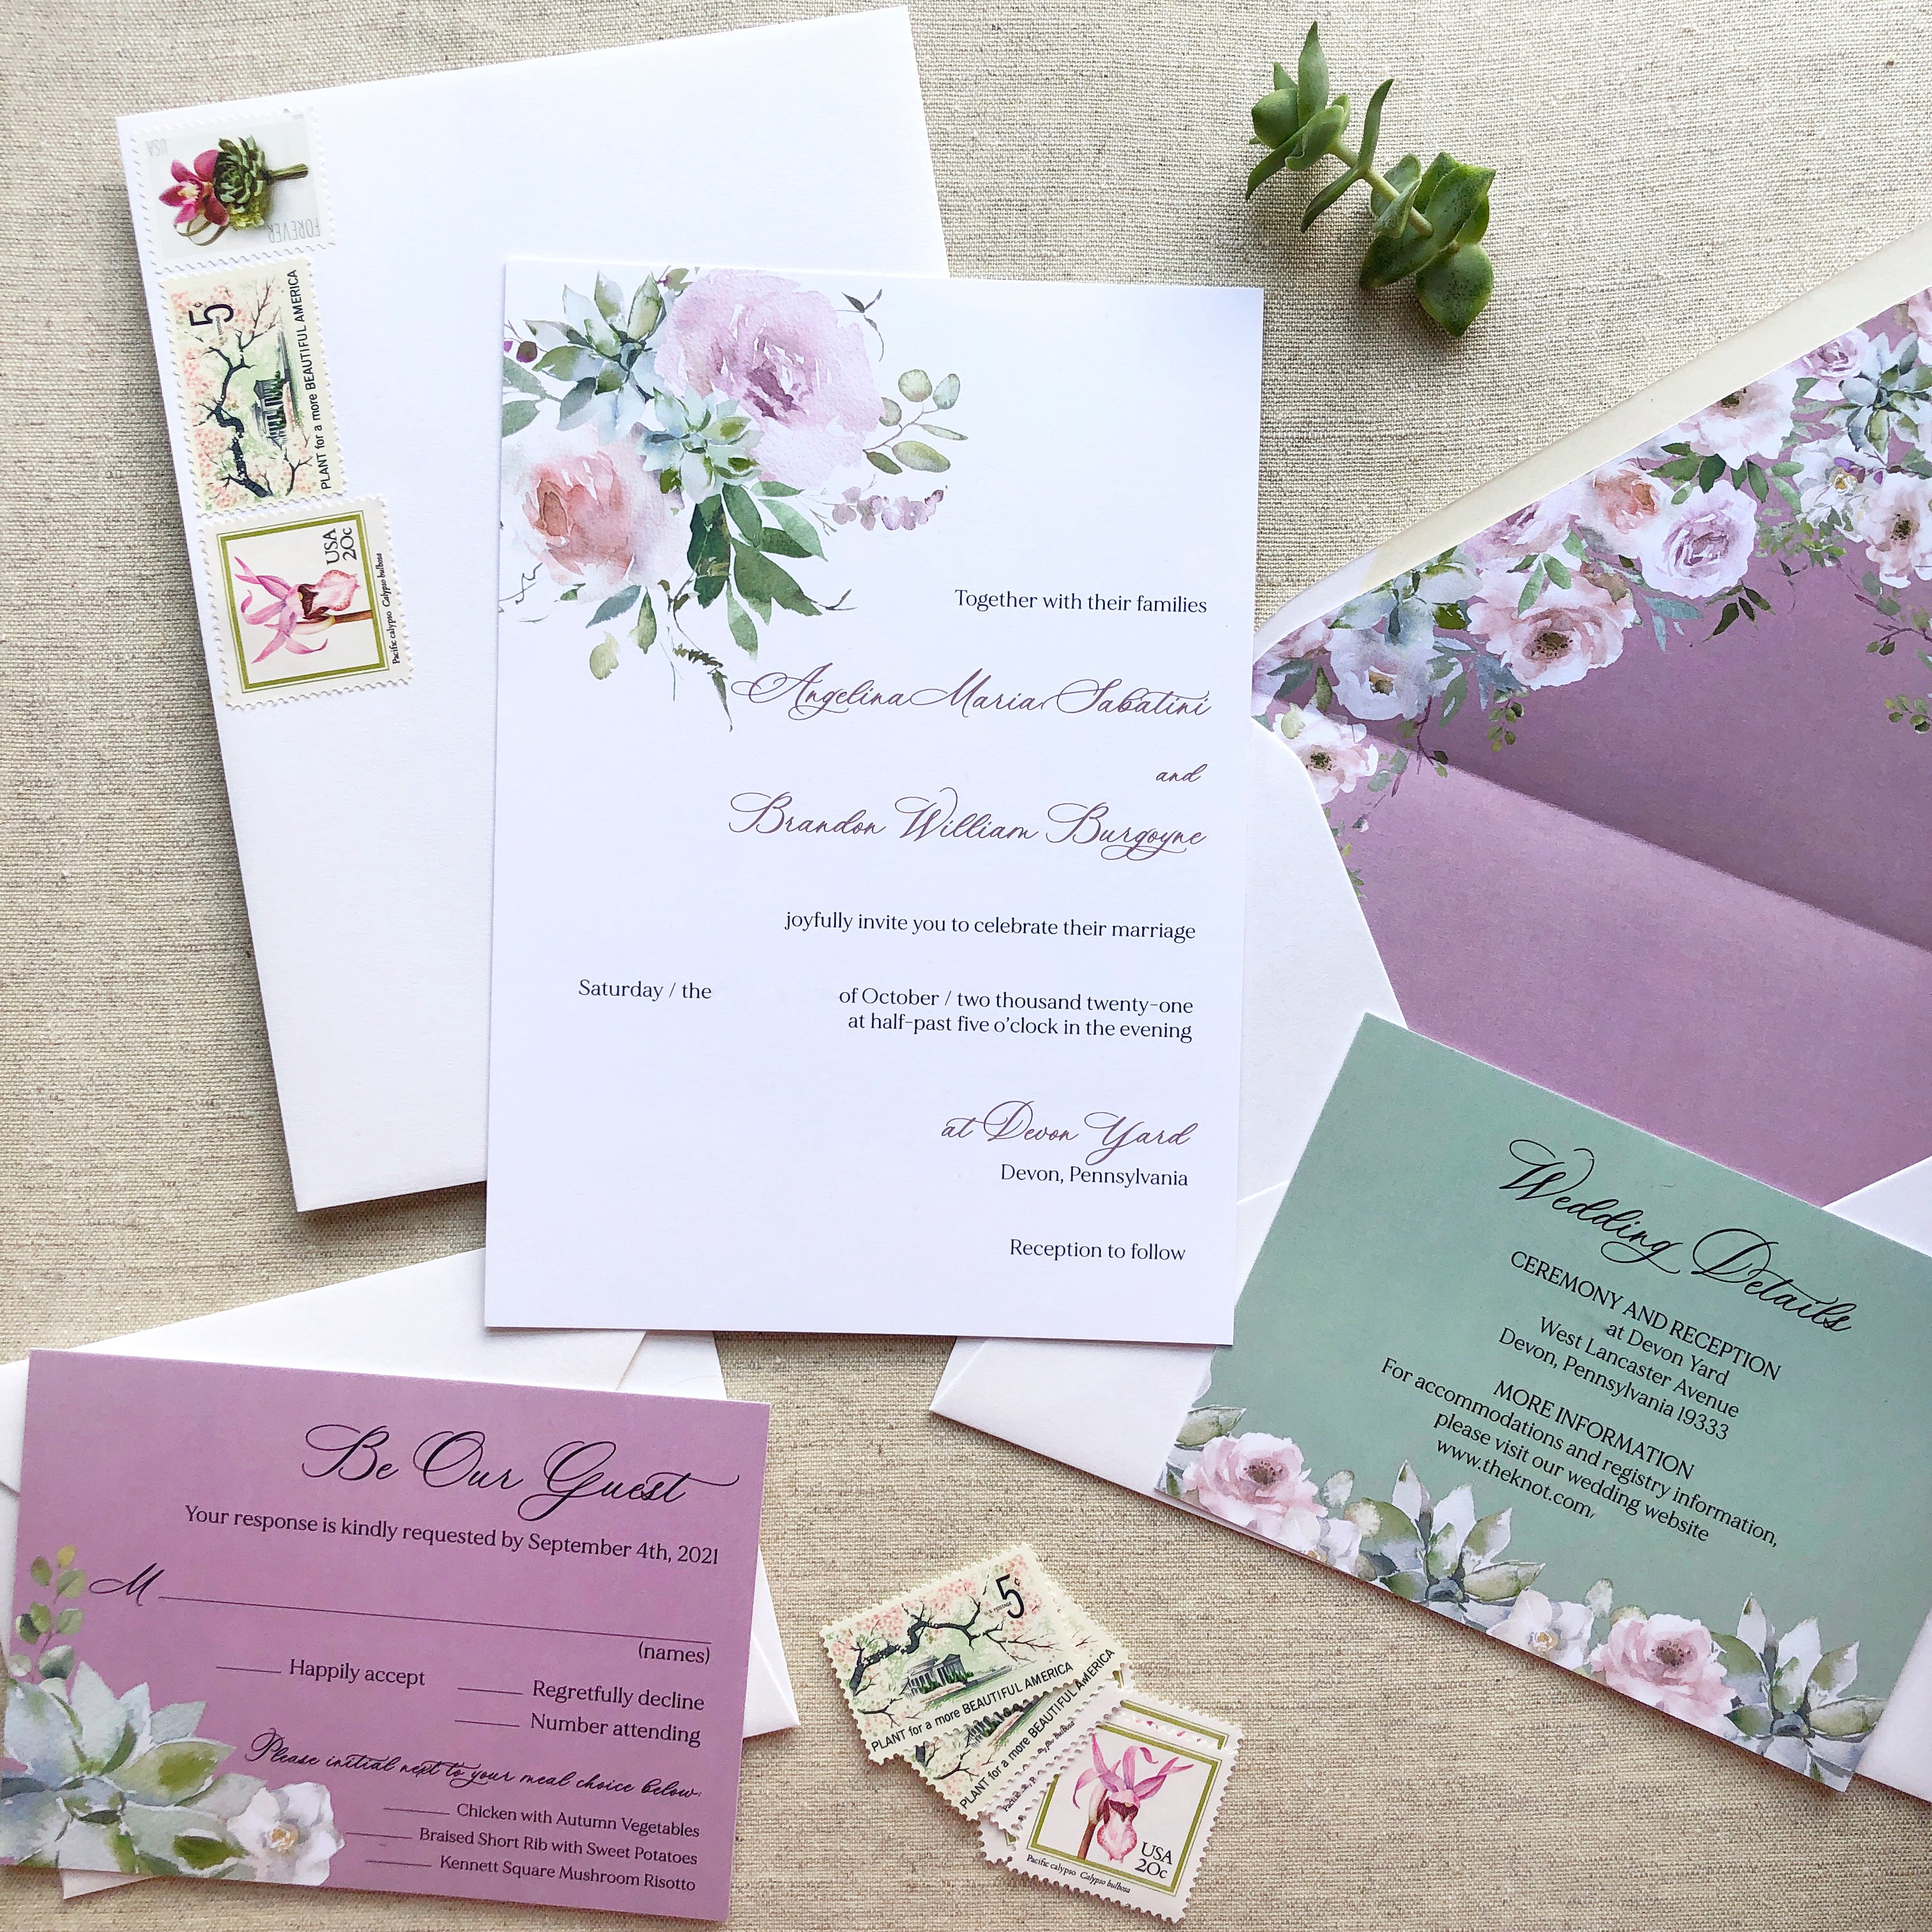 Perfect Wedding Invitations for a Spring 2022 Wedding